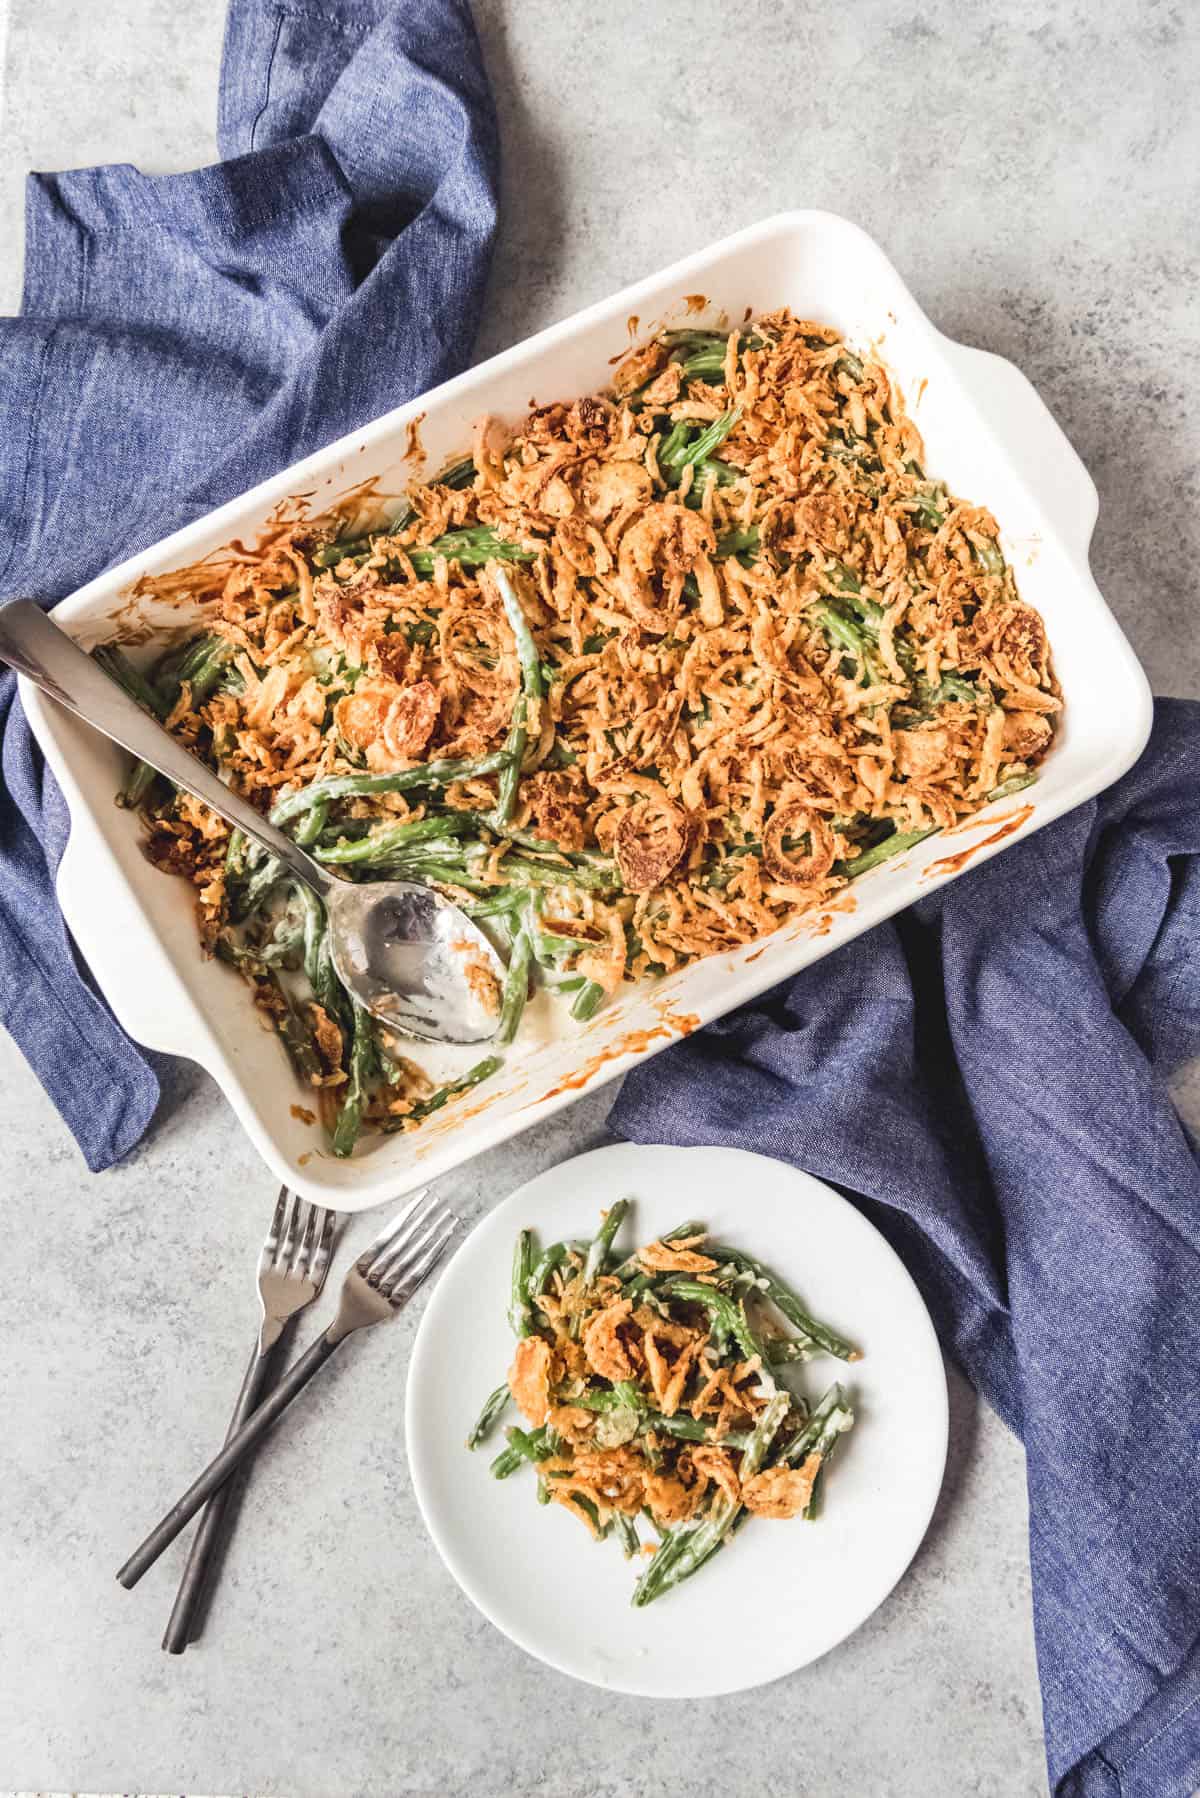 An image of a baking dish of fresh green bean casserole made without any canned ingredients.